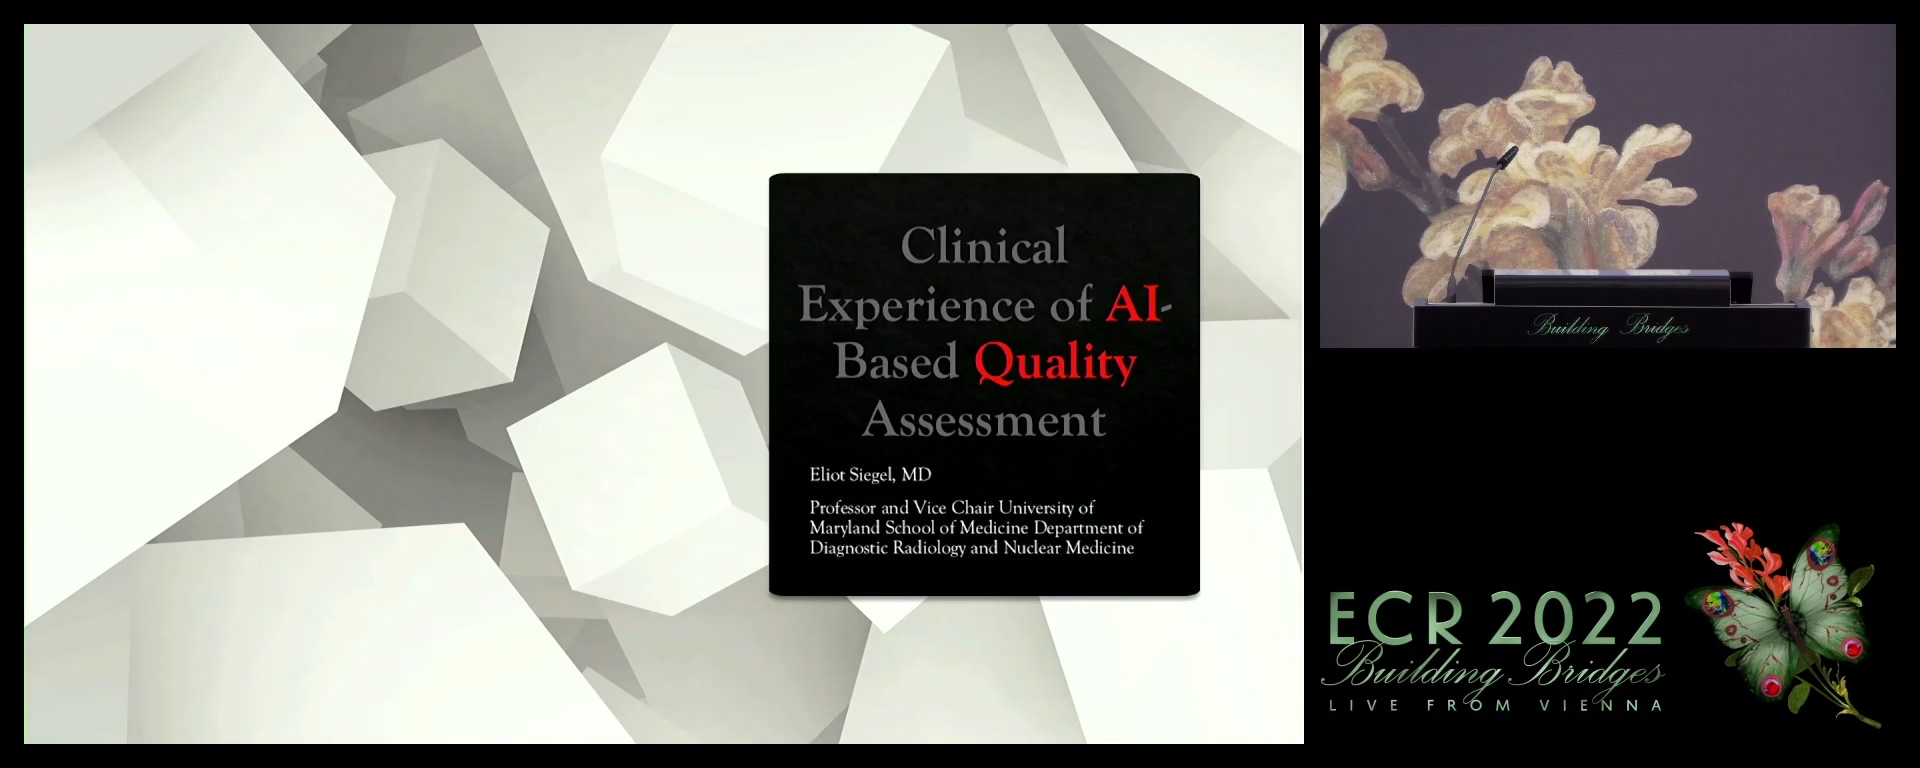 Clinical experience of AI-based quality assessment - Elliot L. Siegel, Baltimore, MD / US